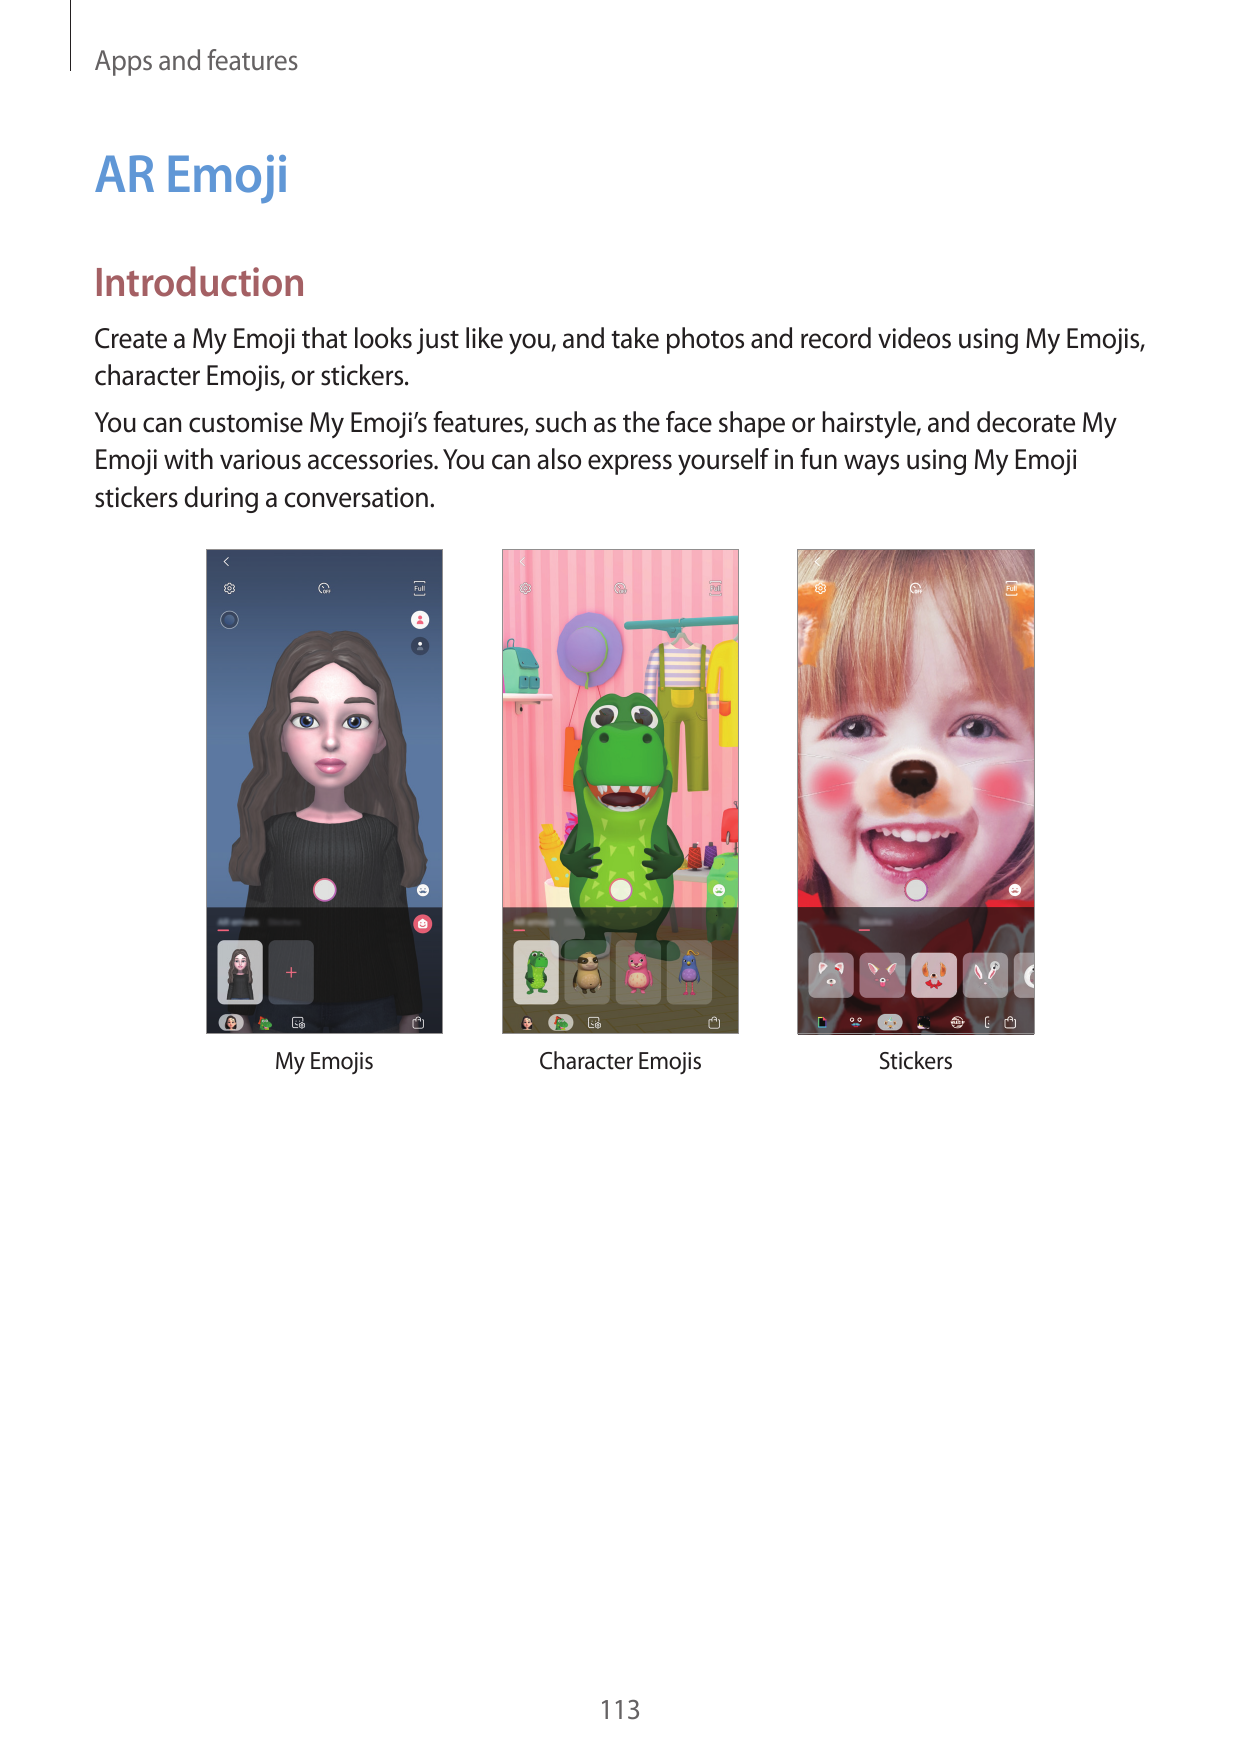 Apps and featuresAR EmojiIntroductionCreate a My Emoji that looks just like you, and take photos and record videos using My Emoj